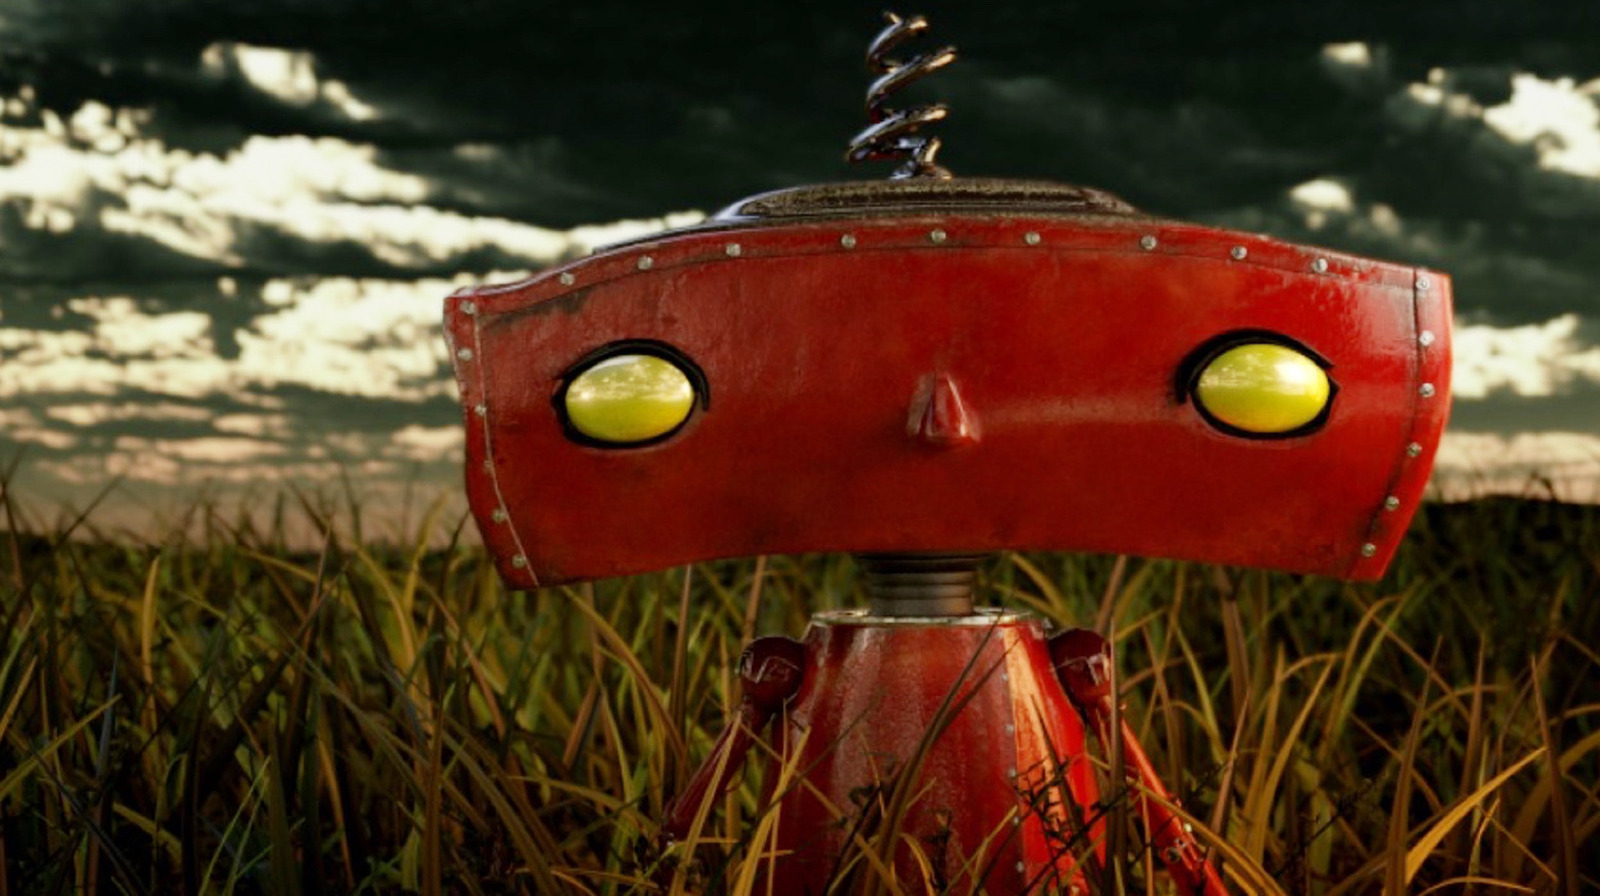 #J.J. Abrams’ Bad Robot Is Partnering With The Black List To Help Underrepresented Writers